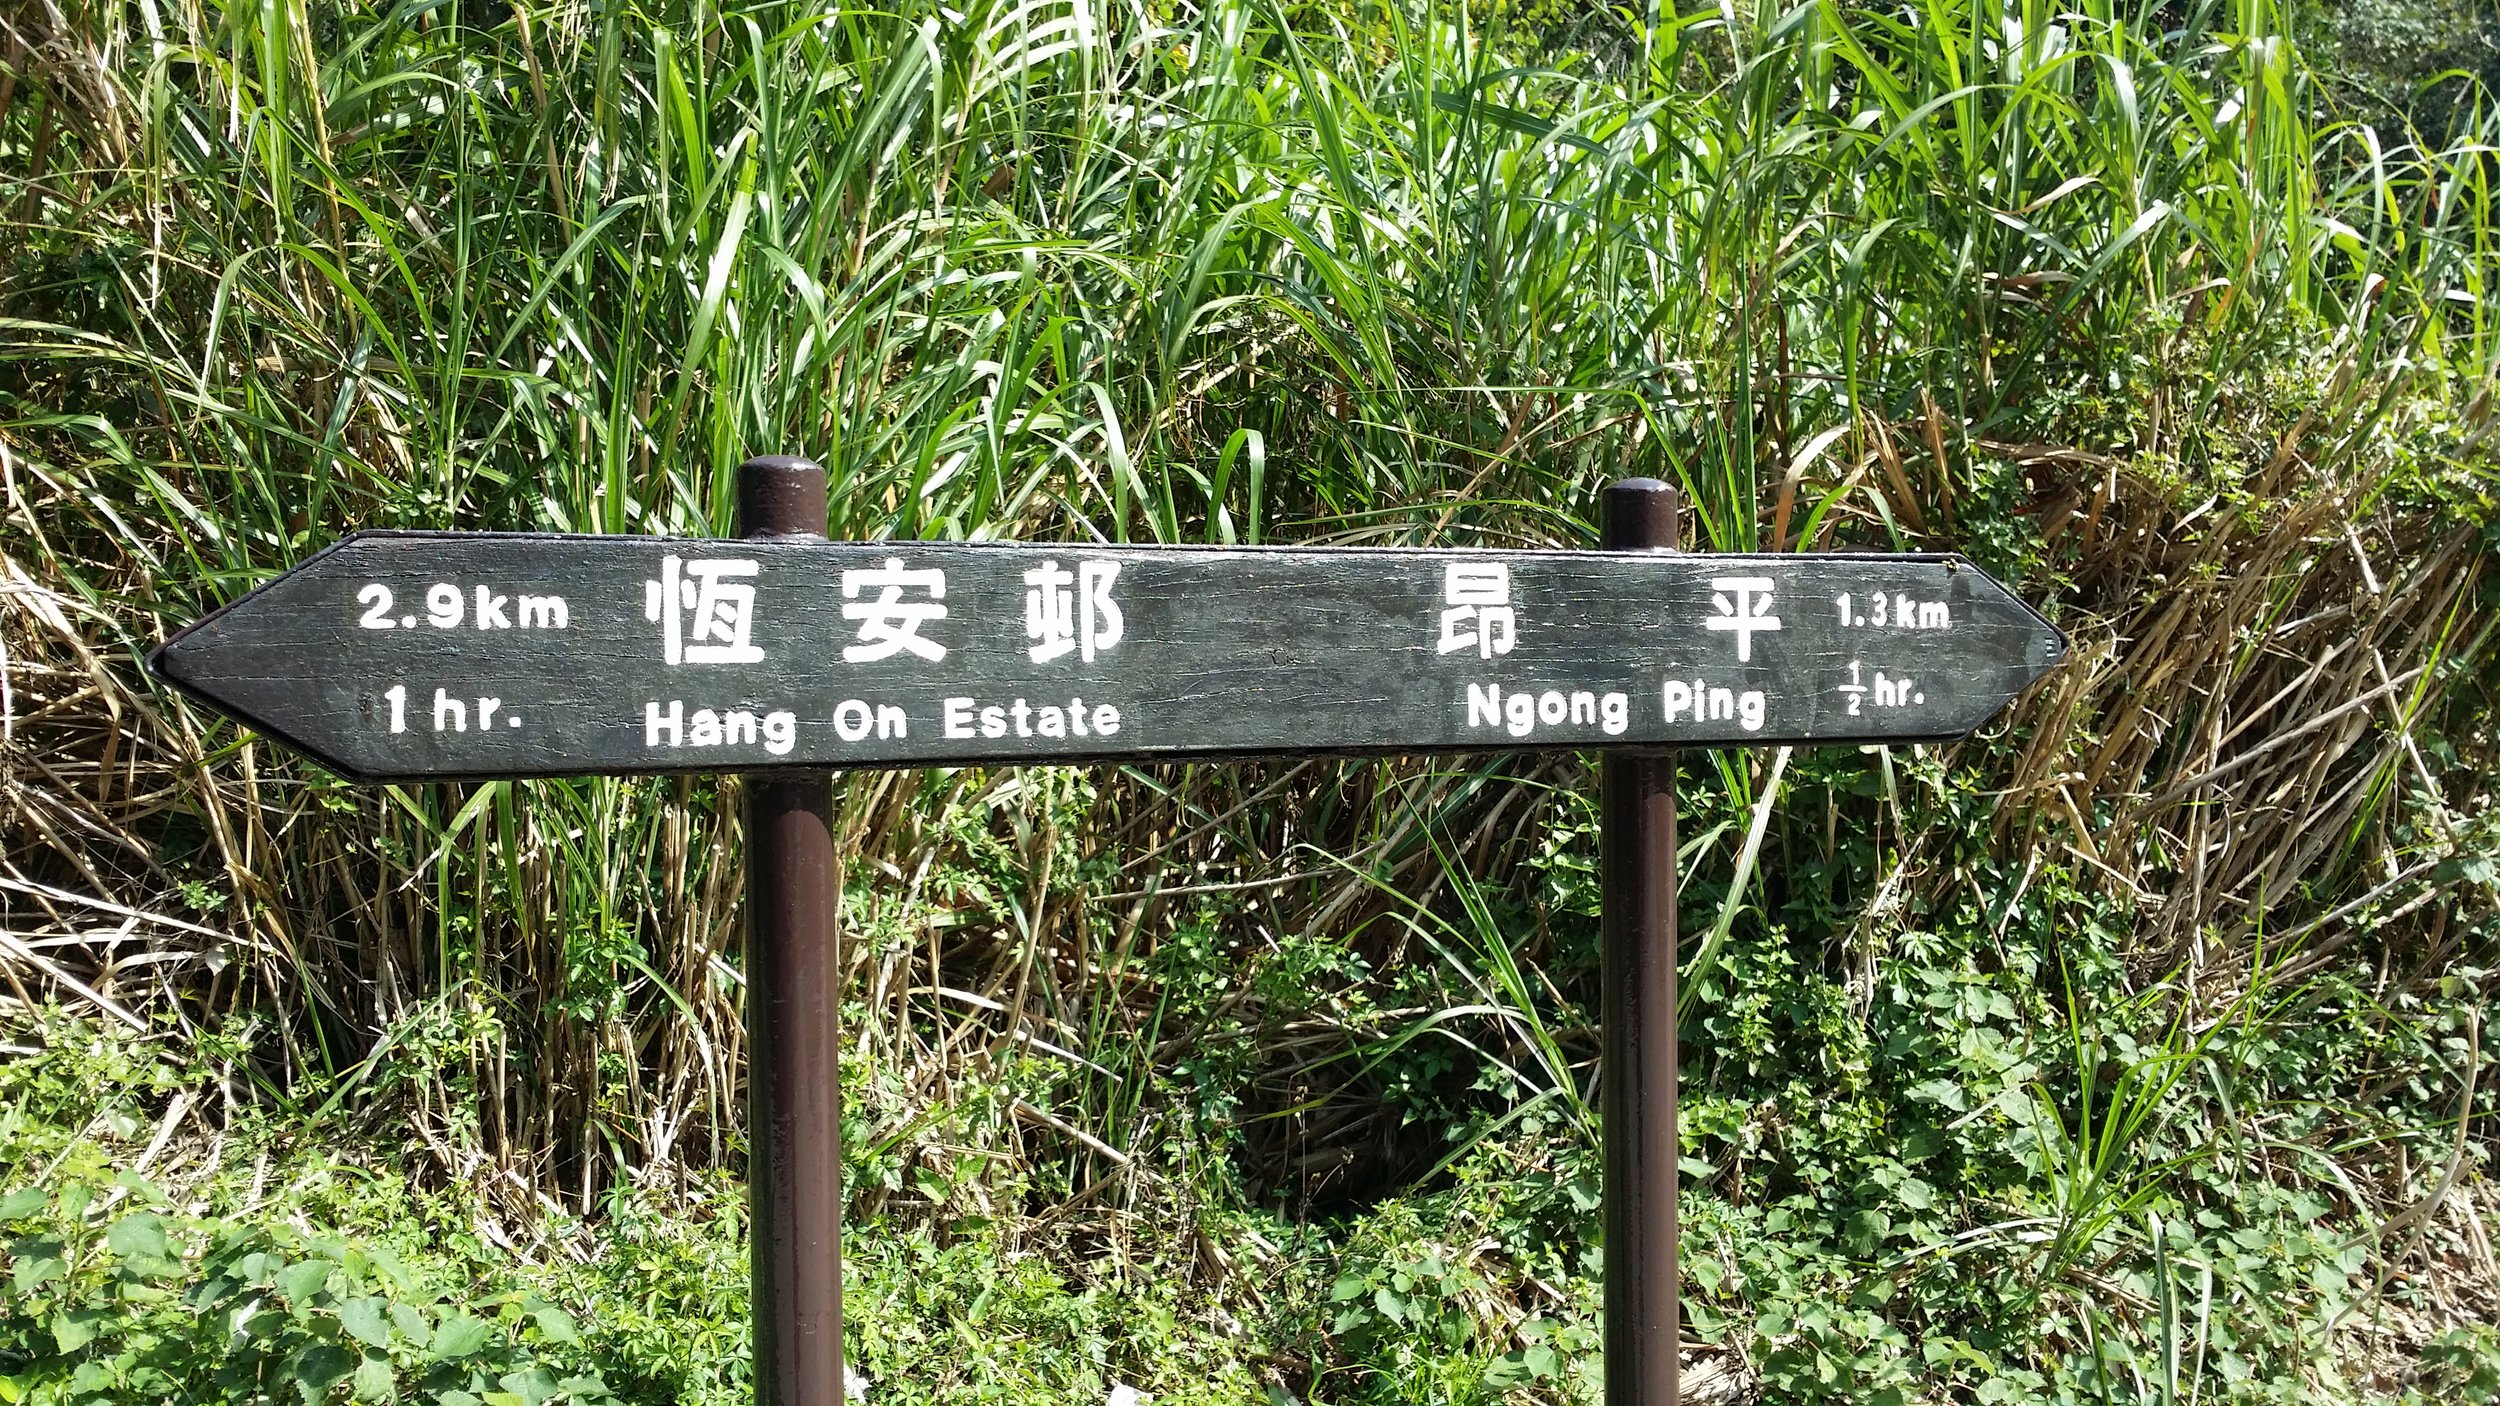 The signpost to Ngong Ping trail